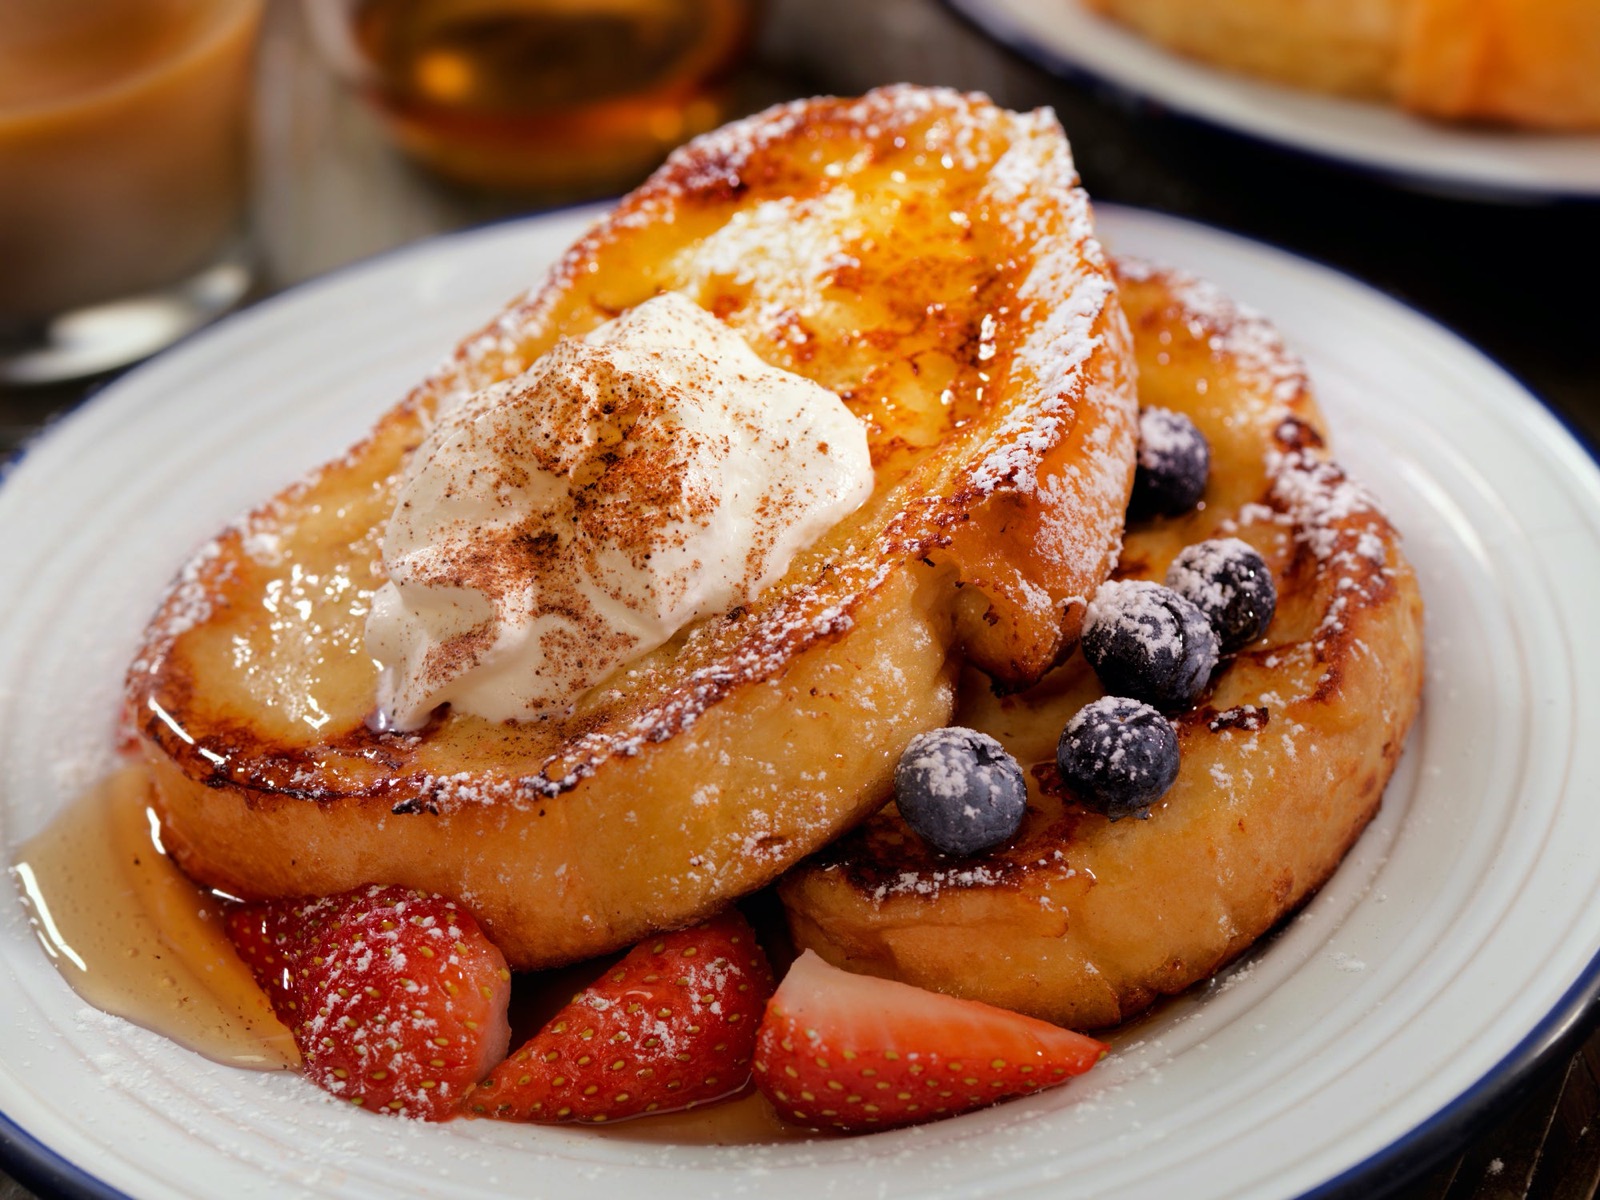 🥞 Sorry, Only Real Foodies Have Eaten at Least 17/24 of These Delicious Brunch Foods French Toast